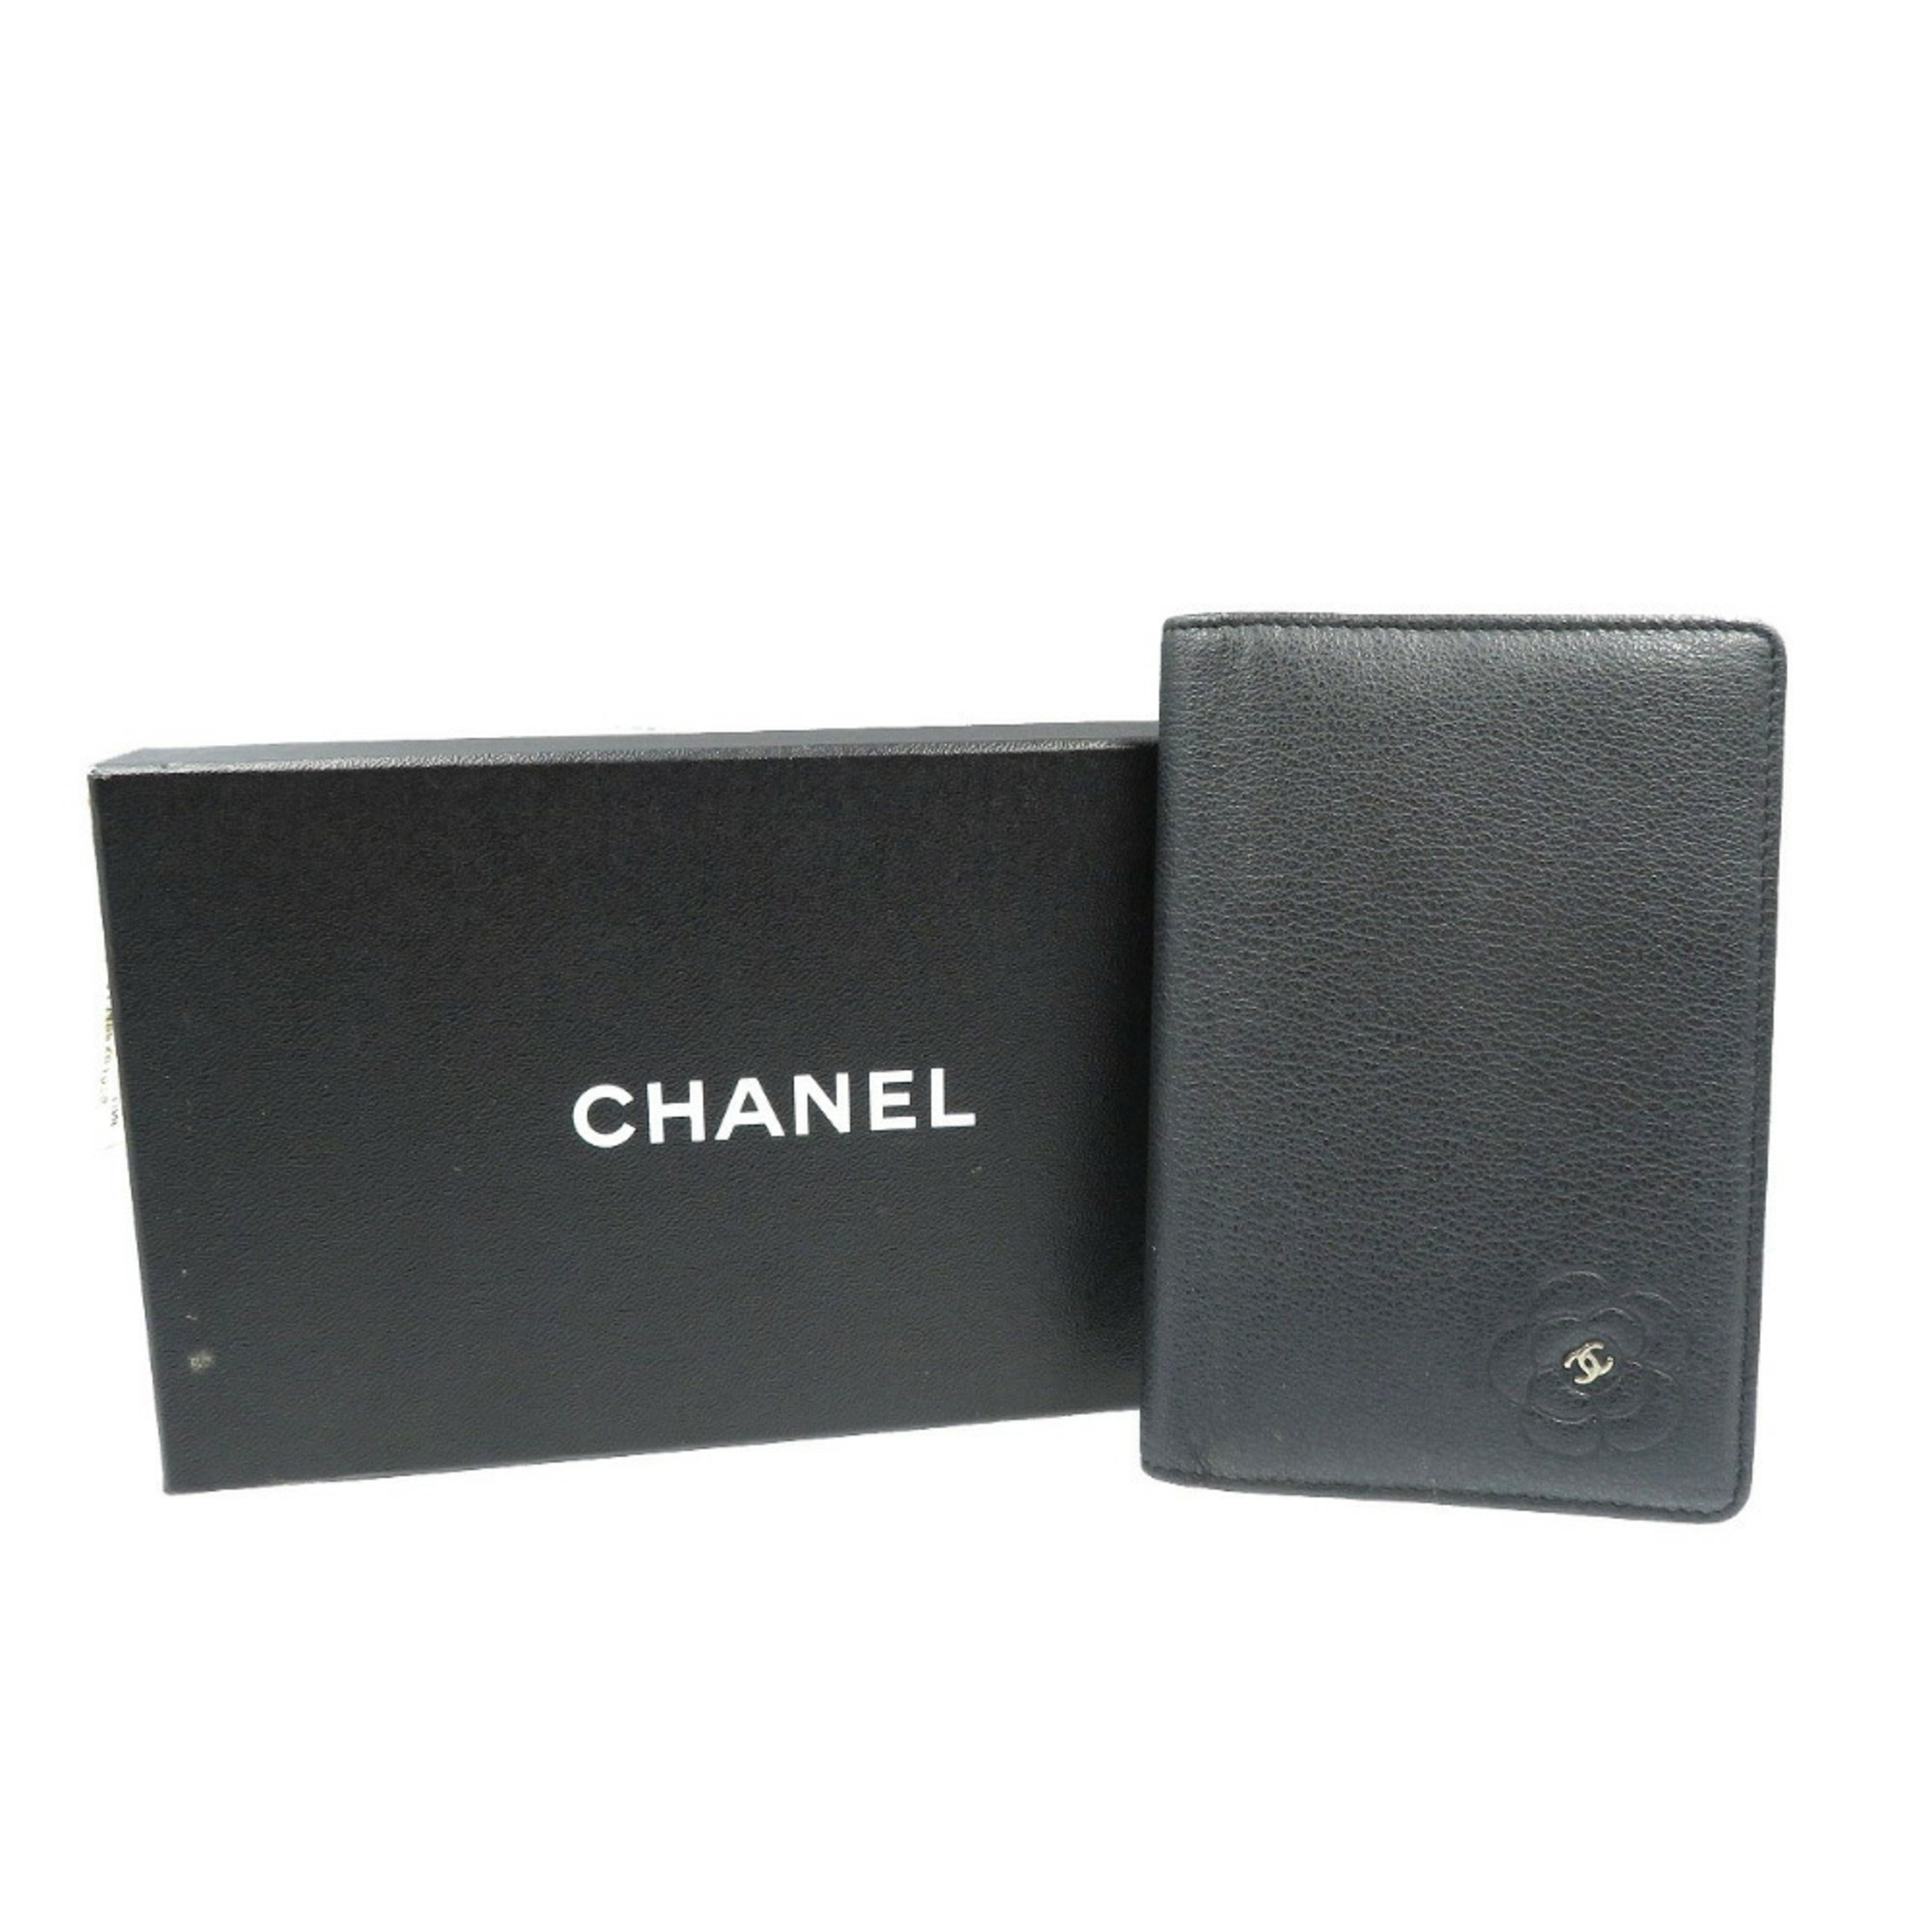 Chanel Camellia Leather Black No. 13 Notebook Cover 0111CHANEL